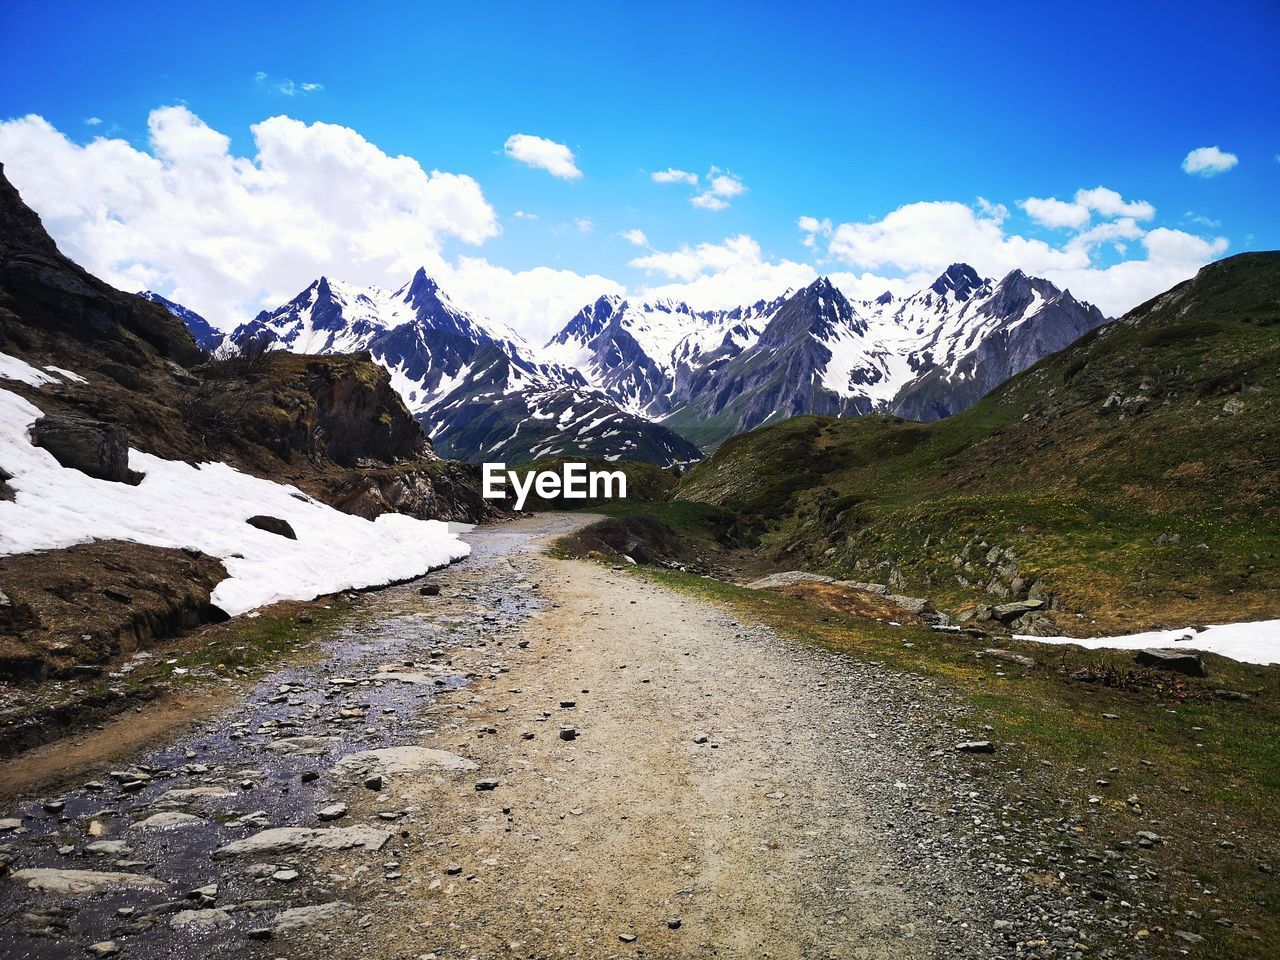 mountain, snow, environment, scenics - nature, landscape, sky, cold temperature, mountain range, beauty in nature, winter, mountain pass, nature, snowcapped mountain, cloud, walking, wilderness, travel, land, travel destinations, valley, road, hiking, mountain peak, ridge, tranquility, tranquil scene, blue, water, activity, ice, footpath, outdoors, backpacking, leisure activity, tourism, non-urban scene, adventure, plateau, day, glacier, transportation, grass, plant, idyllic, holiday, vacation, trip, lake, rock